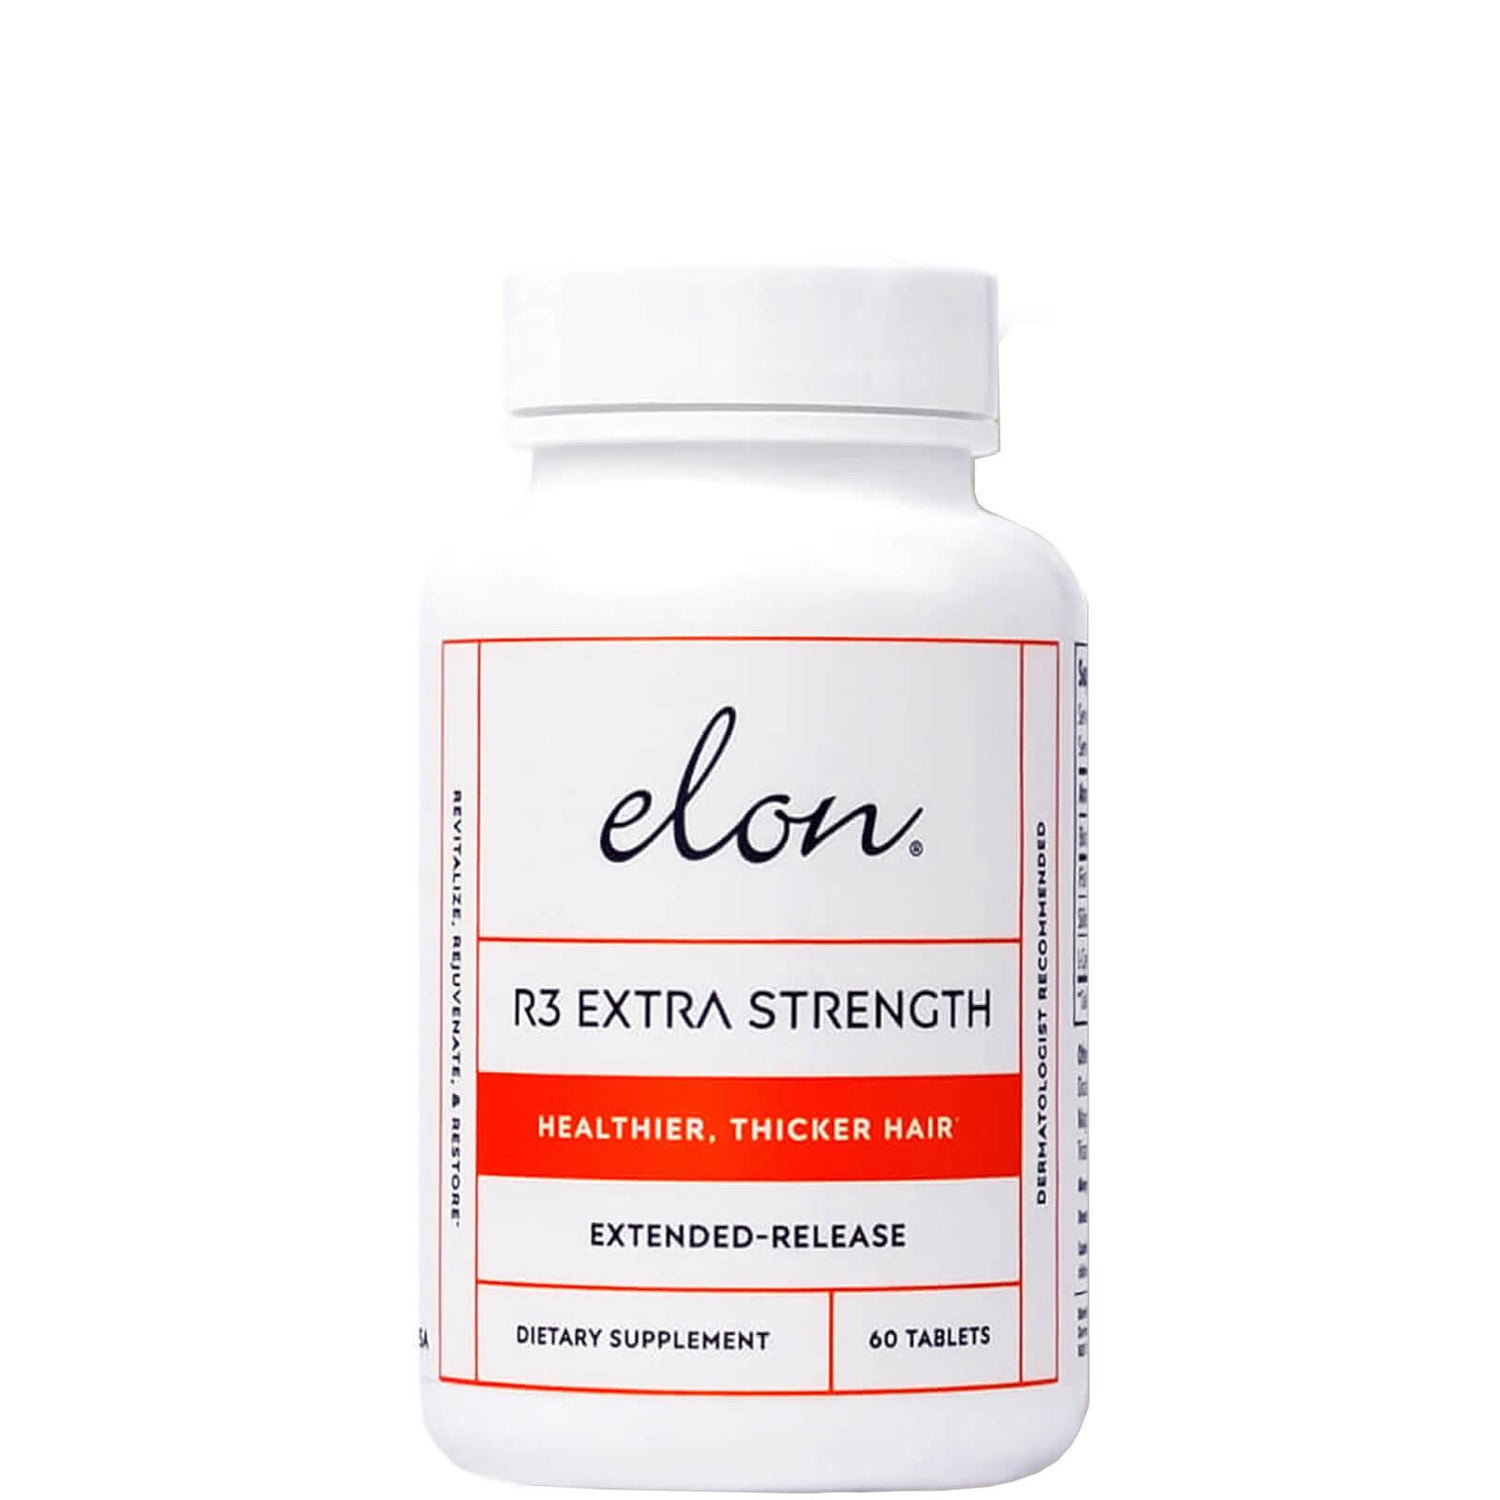 Elon R3 Extra Strength for Thinning Hair (60 tablets) - Dermstore